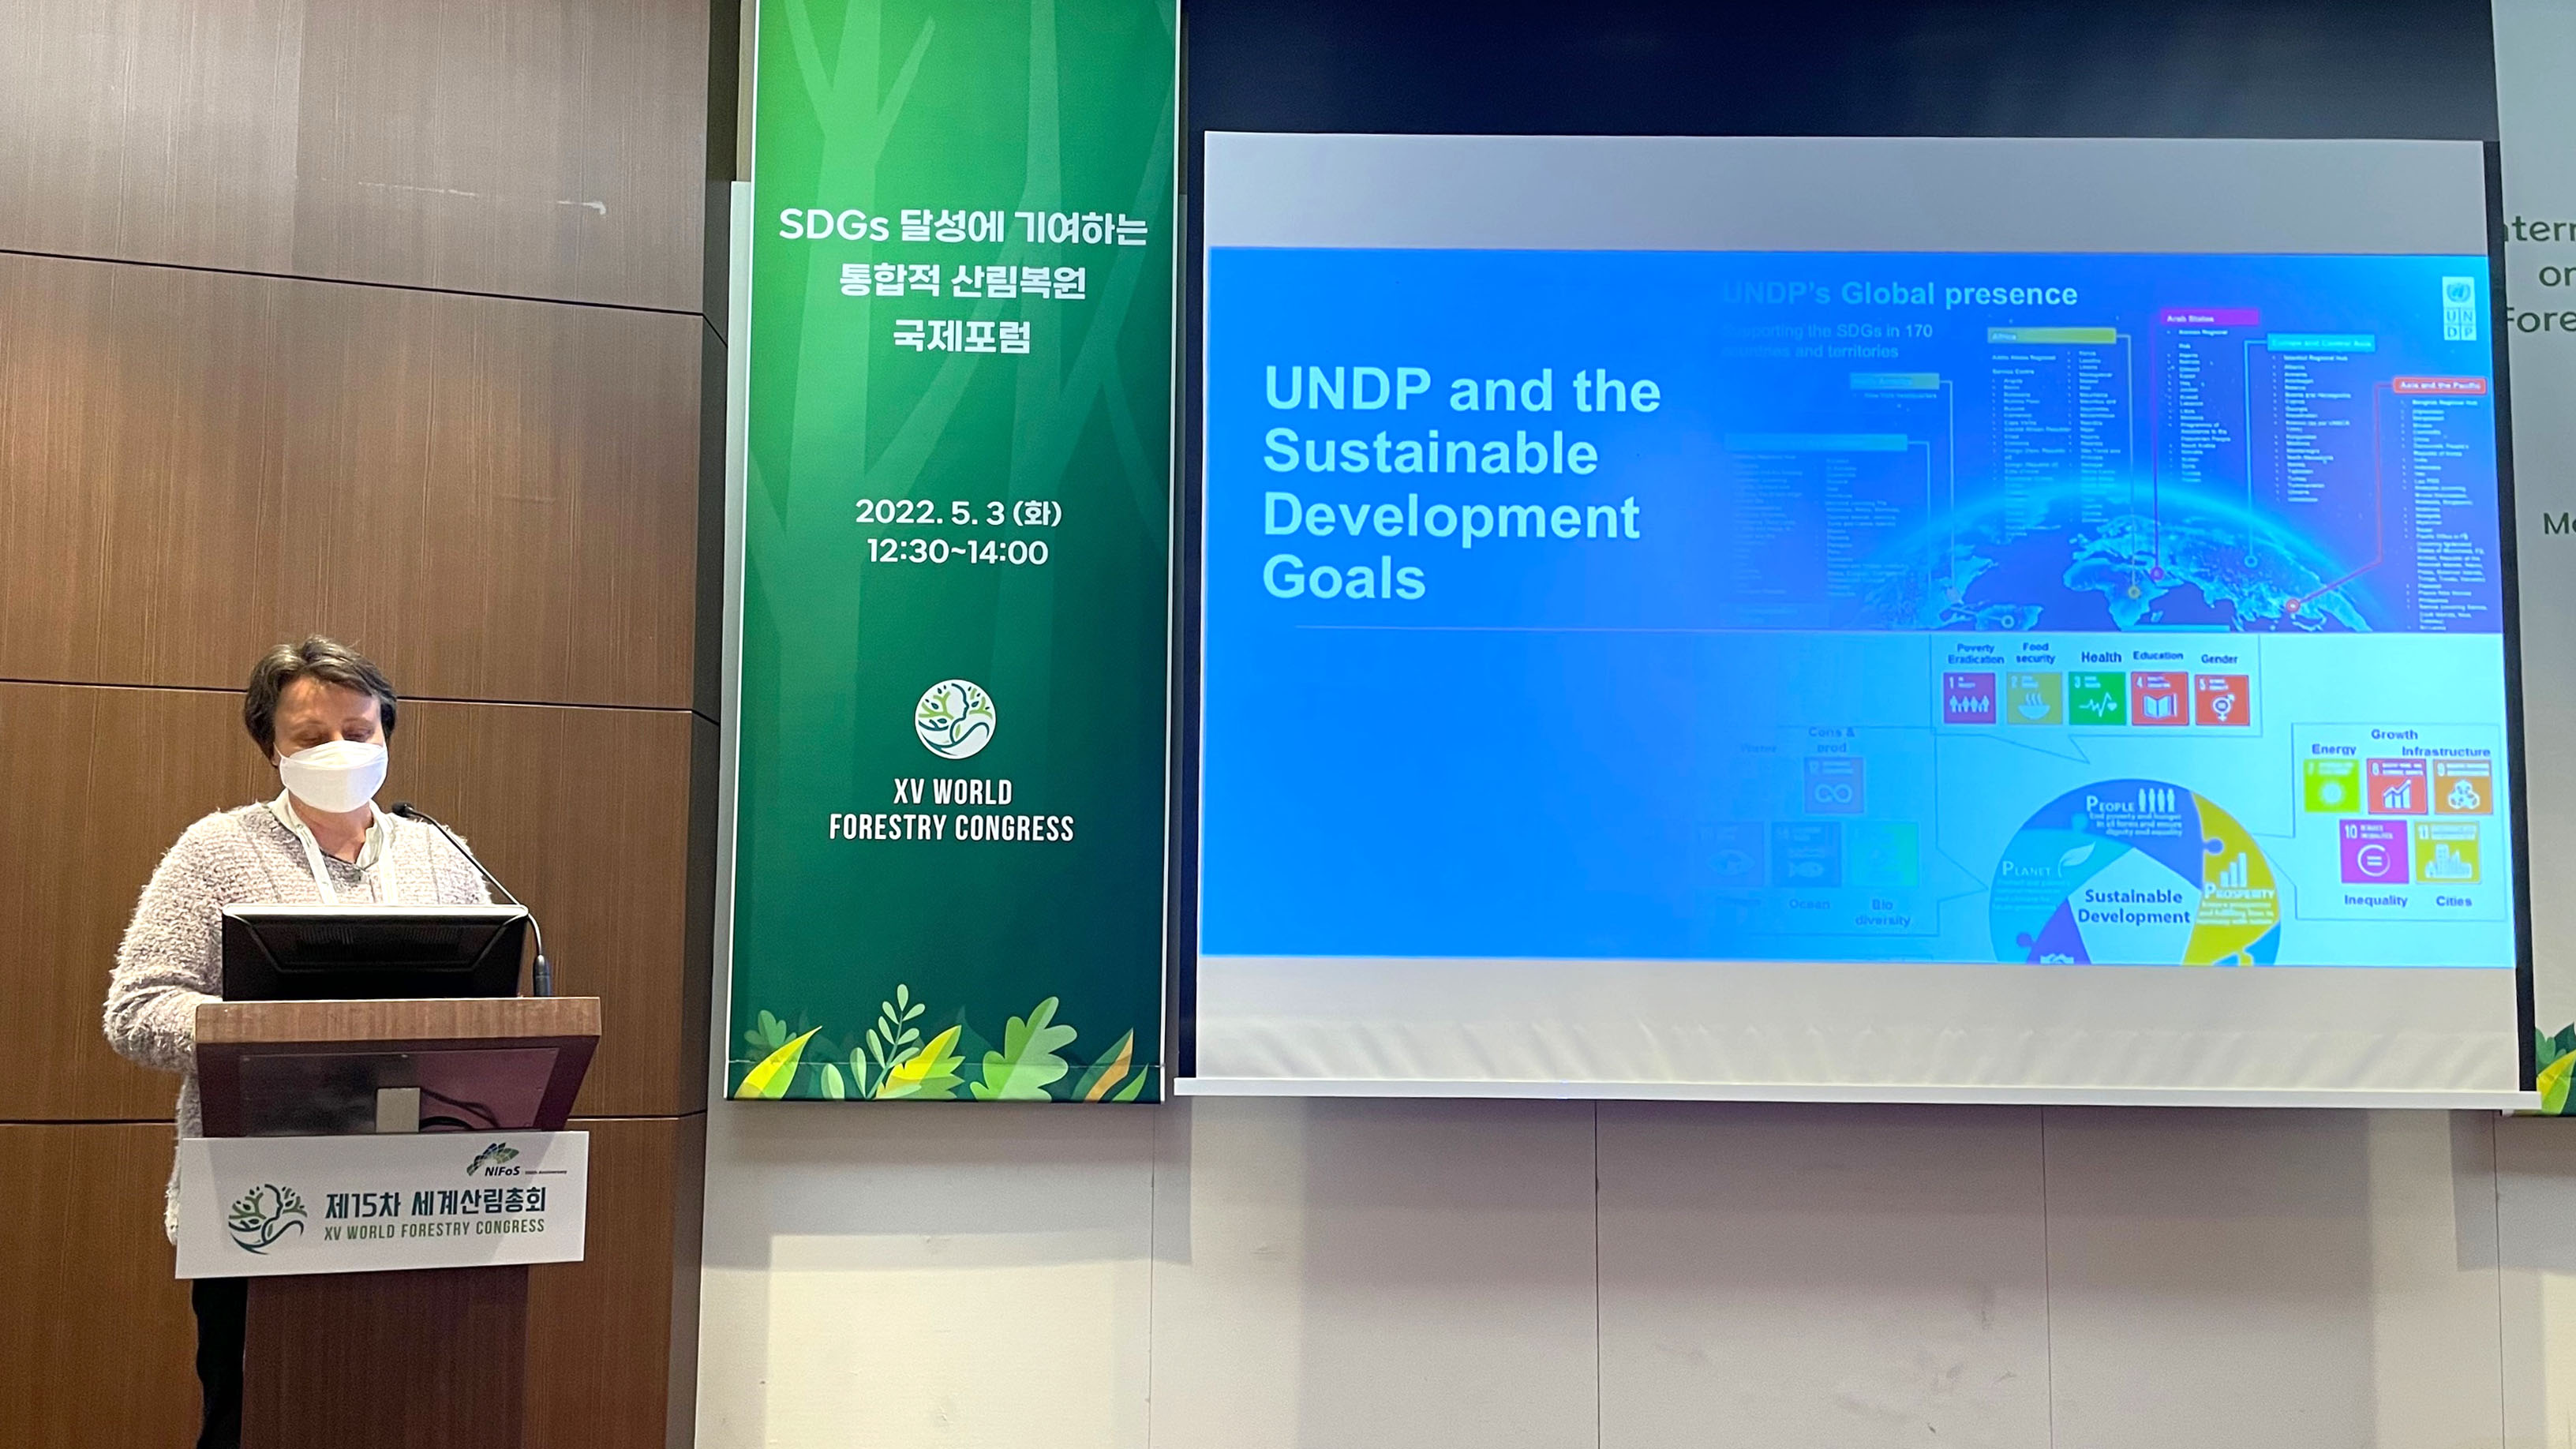 Dr. Anne Juepner, Director a.i. of UNDP Seoul Policy Centre is giving a speech on UNDP and the SDGs at the XV World Foresty Congress in Korea.